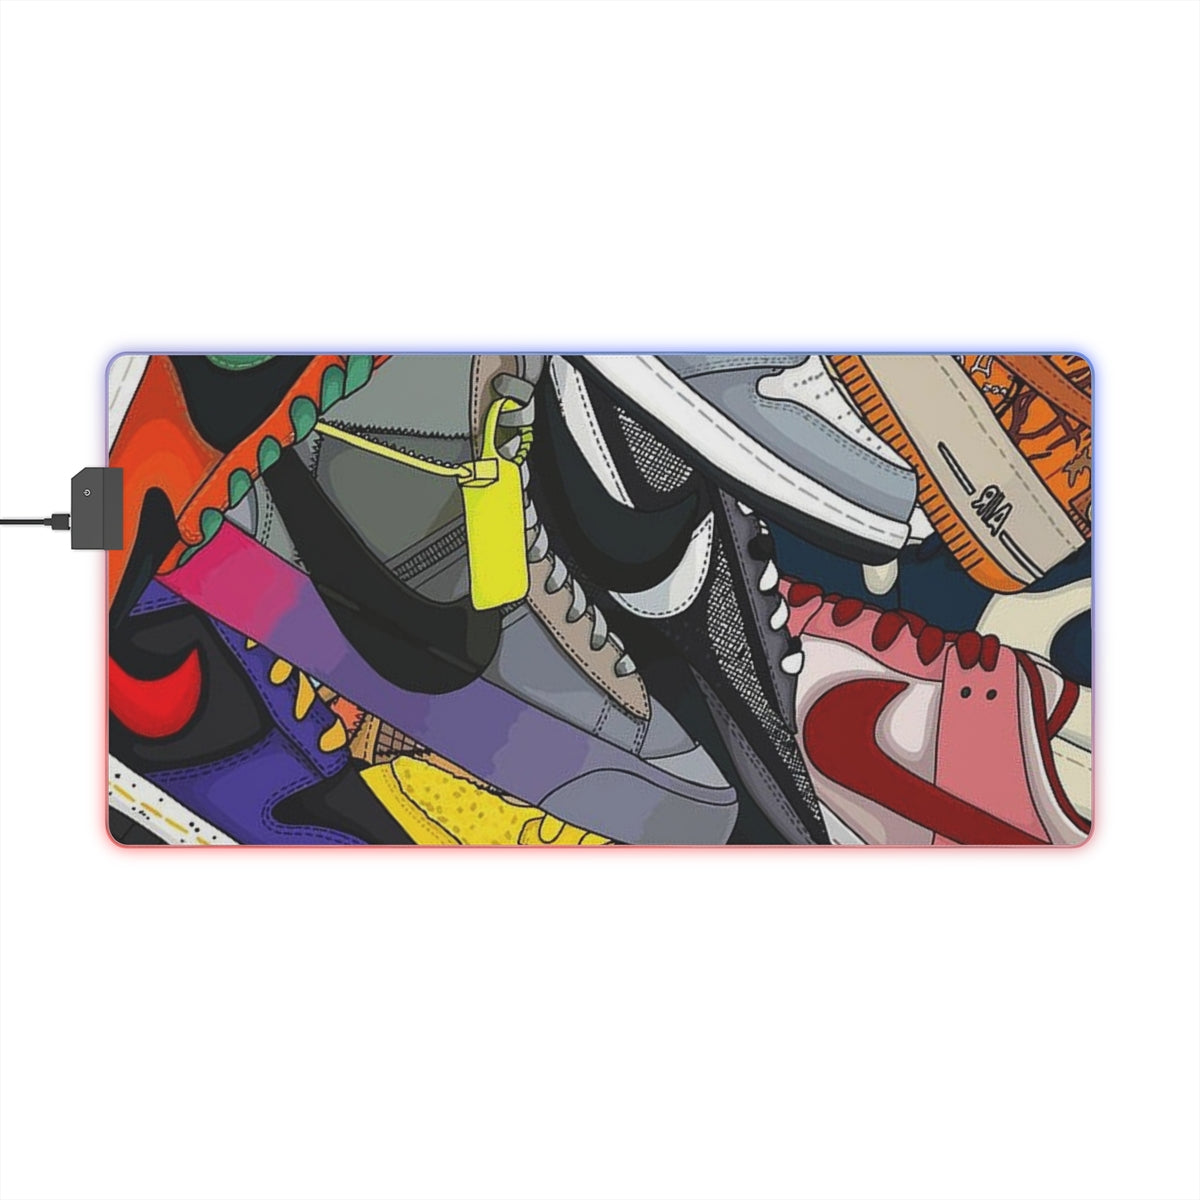 Contrast Clothing Worthing Nike sneaker gaming mouse pad 